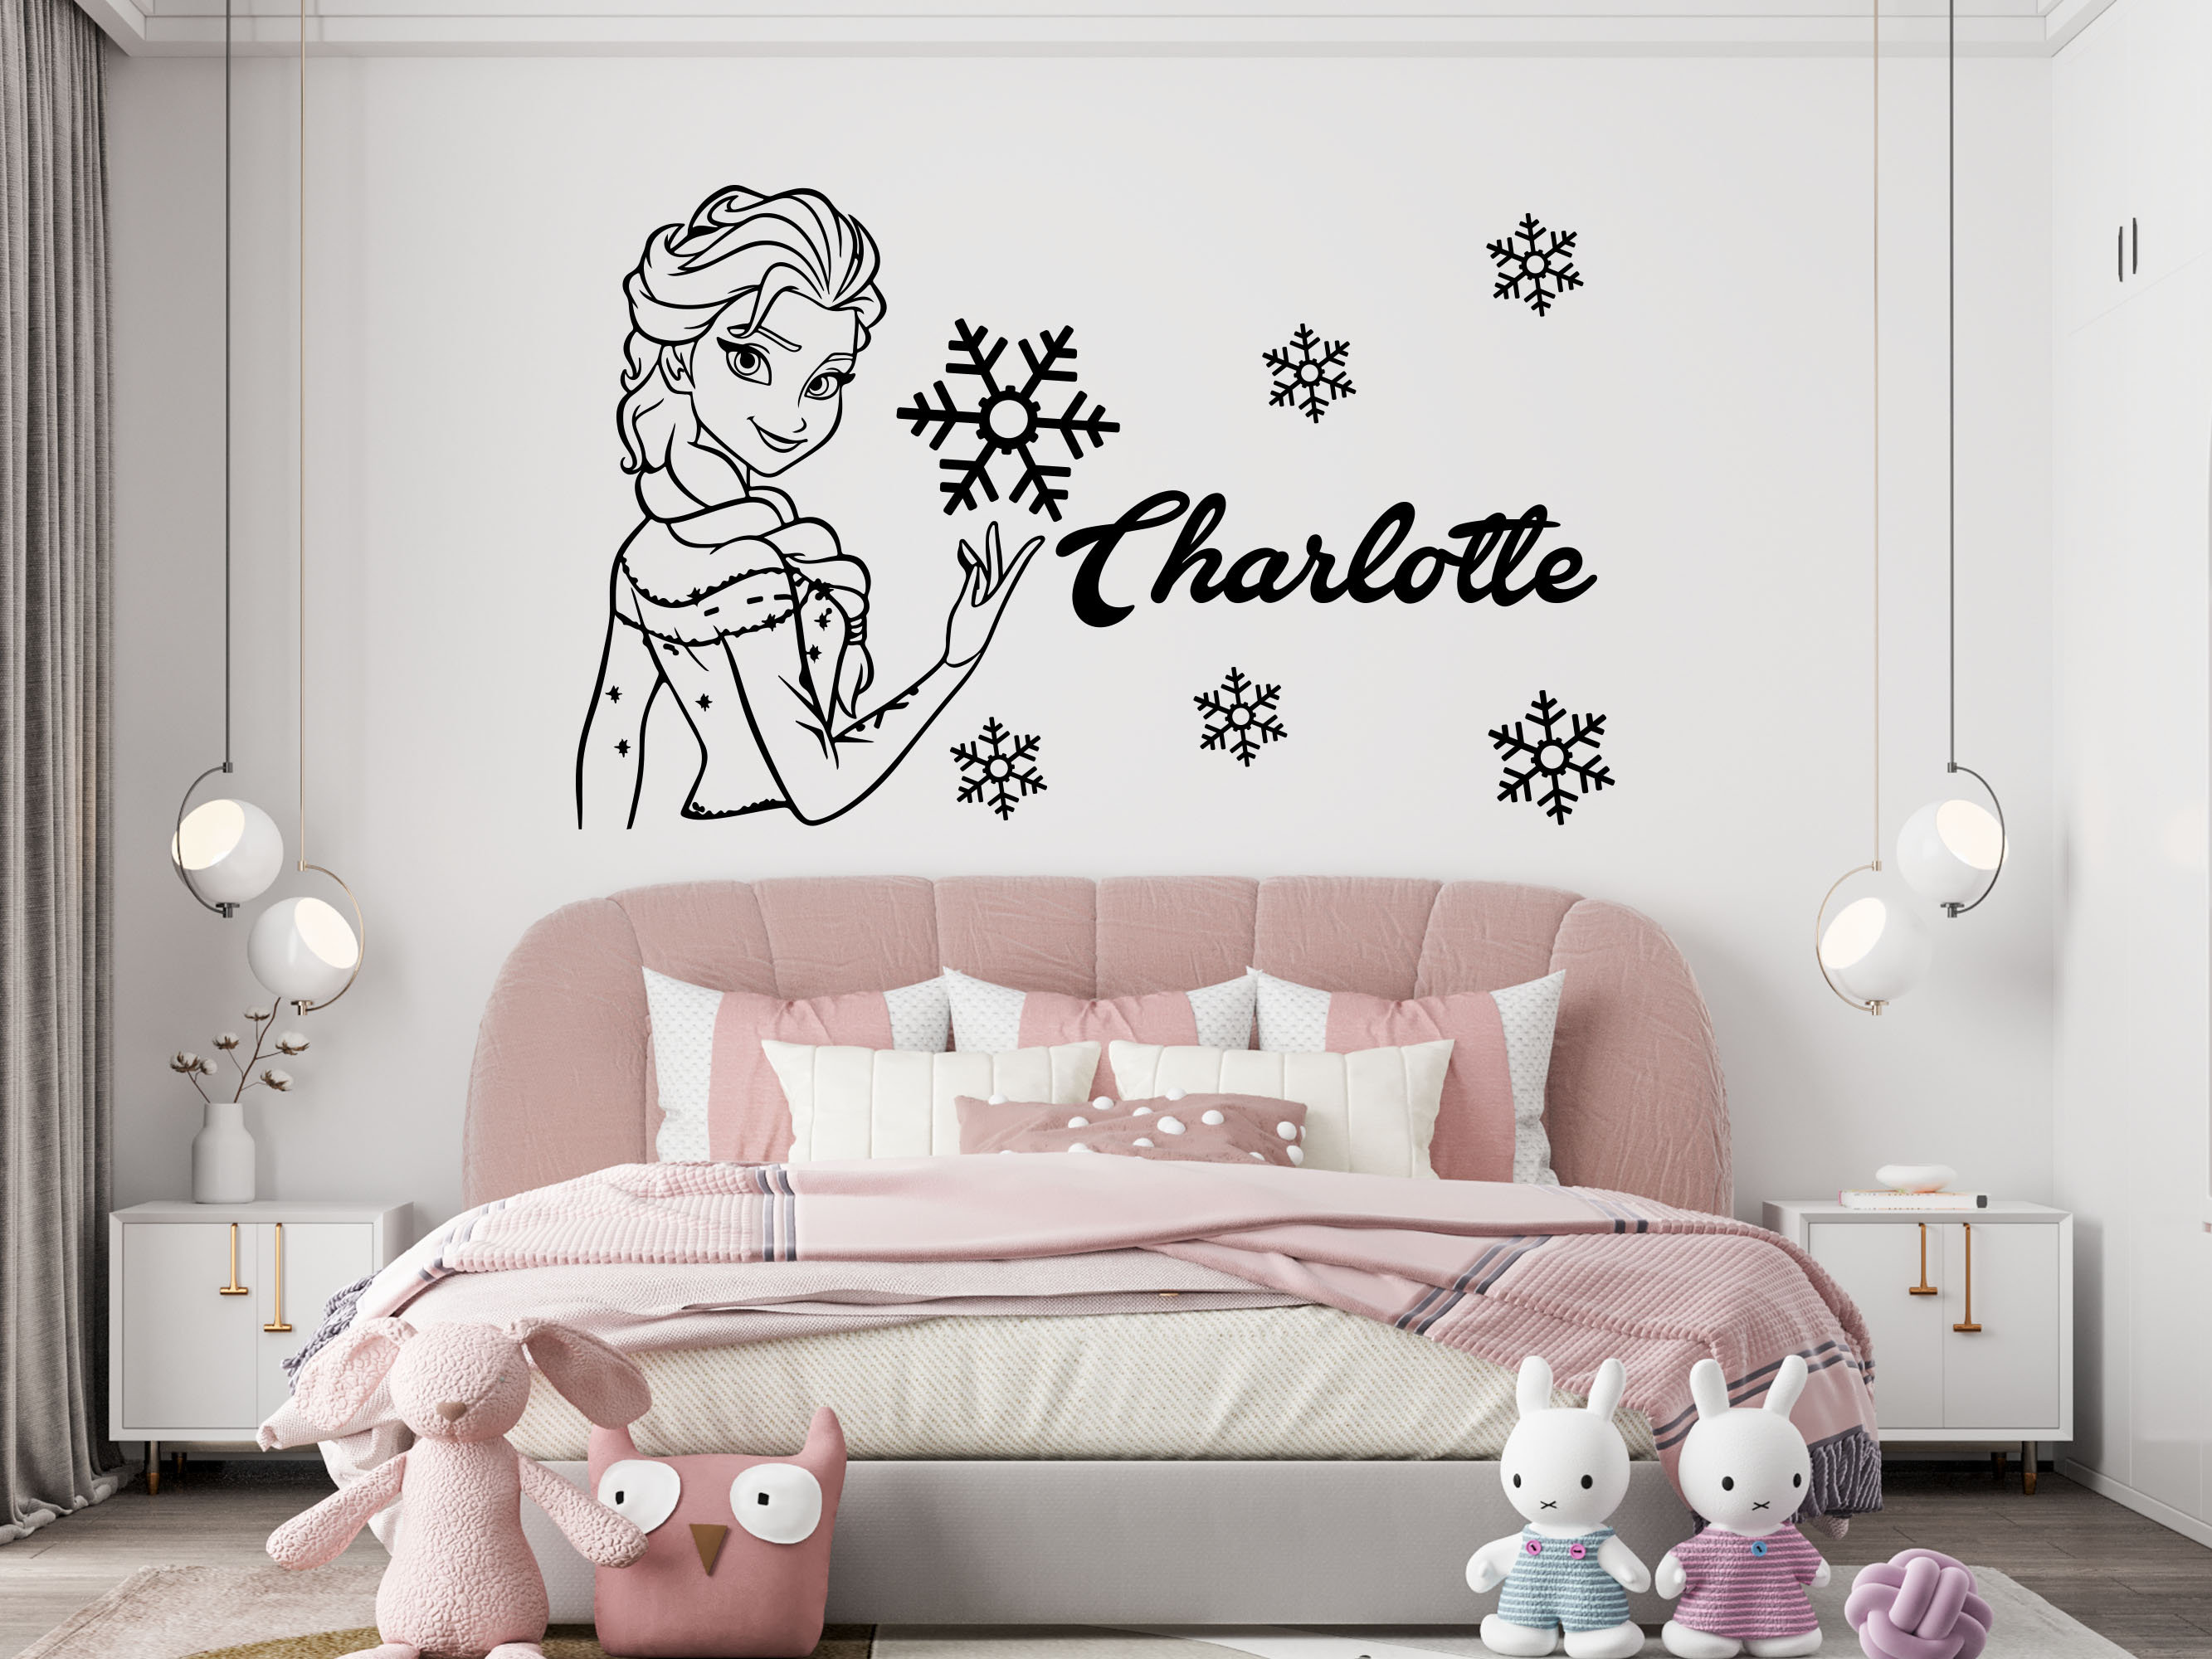  Wall Palz Disney Frozen 2 Wall Decals - Elsa Frozen Wall Decal  with 3D Augmented Reality Interaction - Frozen Bedroom Decor for Girls :  Tools & Home Improvement